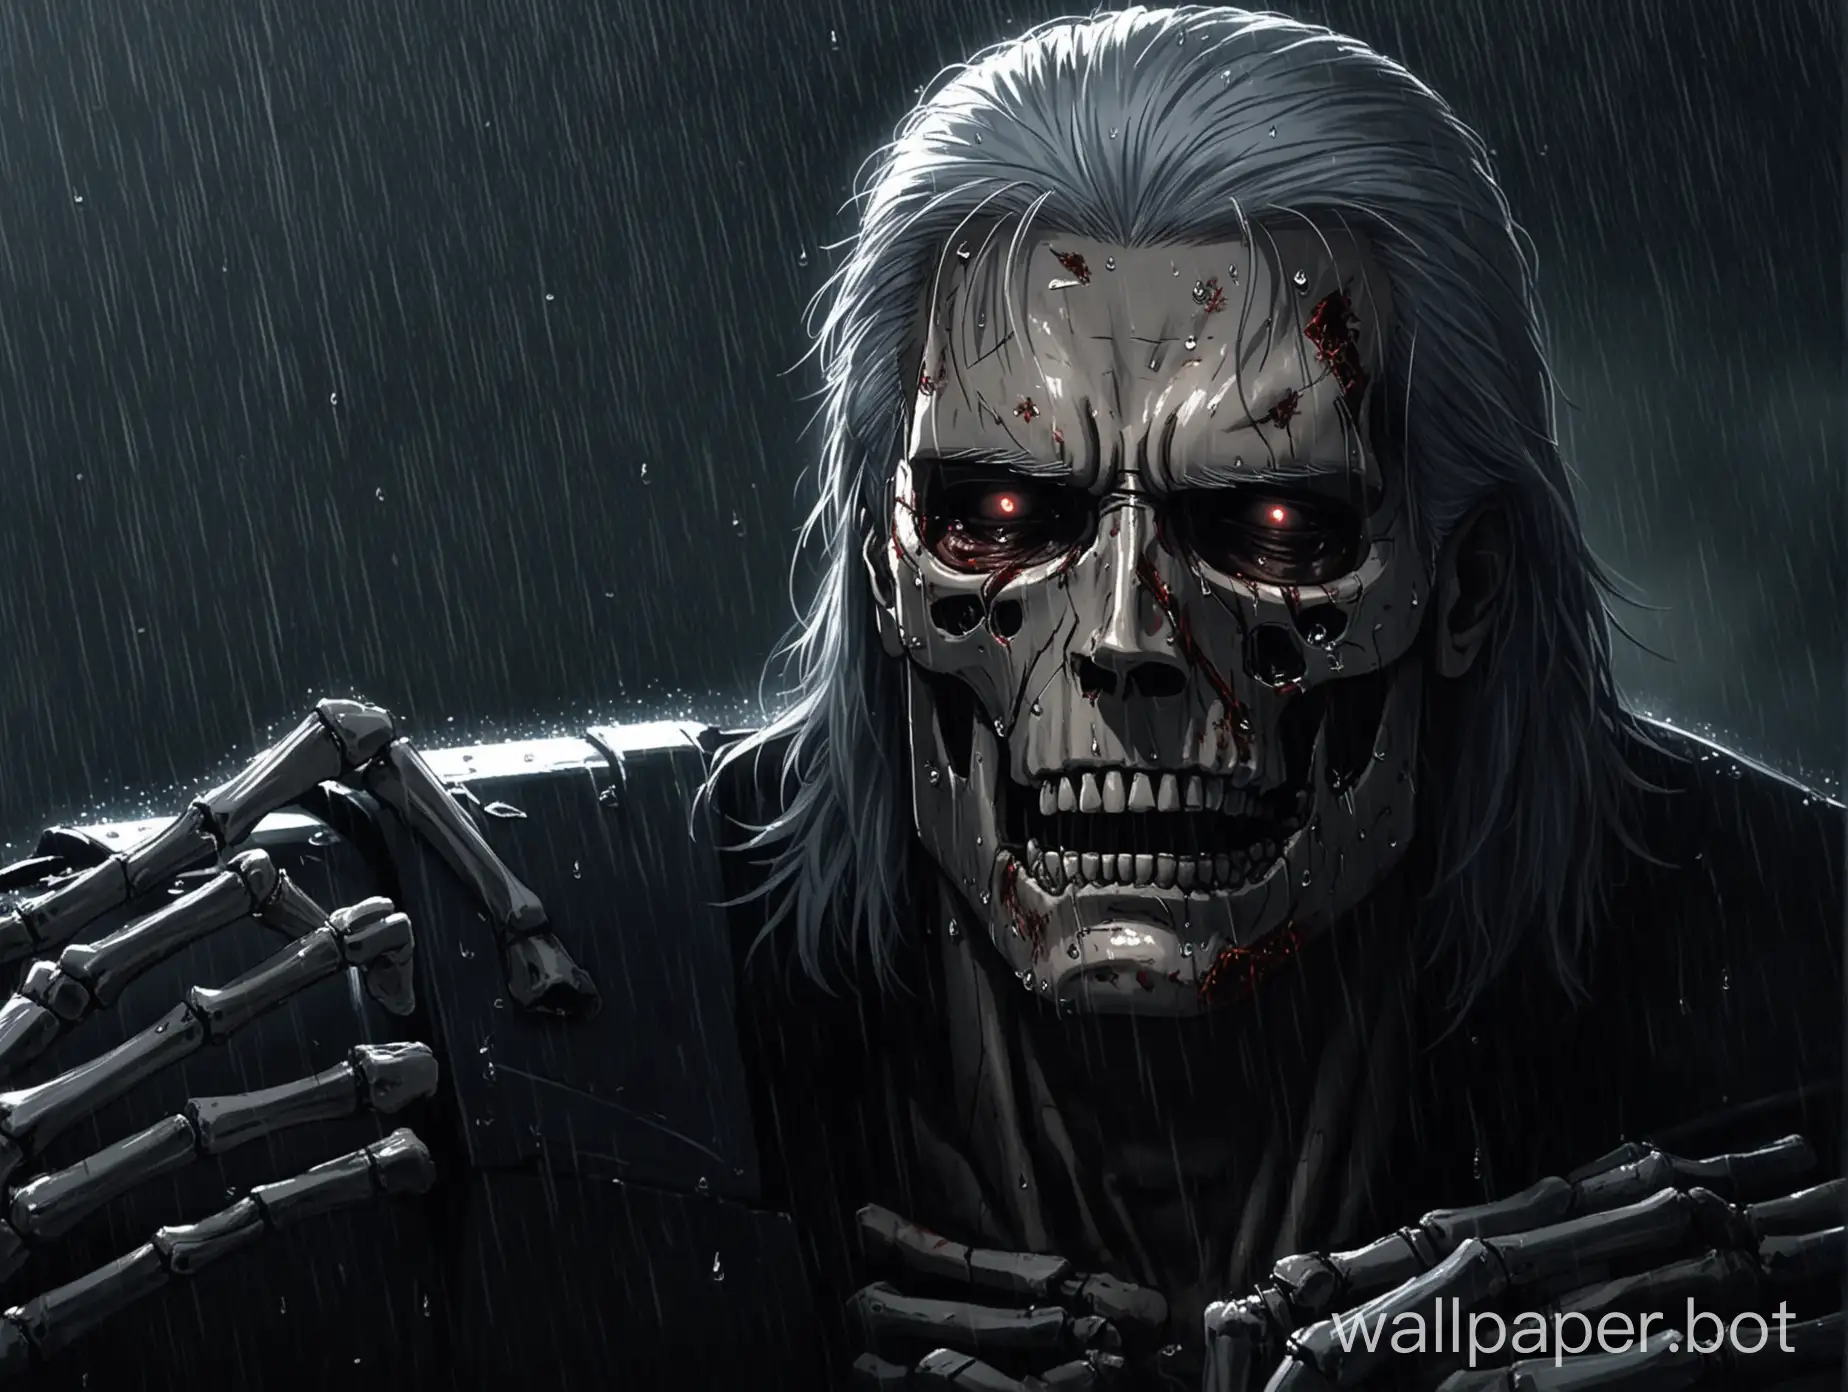 Geralt-Terminator-Grieves-with-Angel-and-Death-in-Rainy-Scene